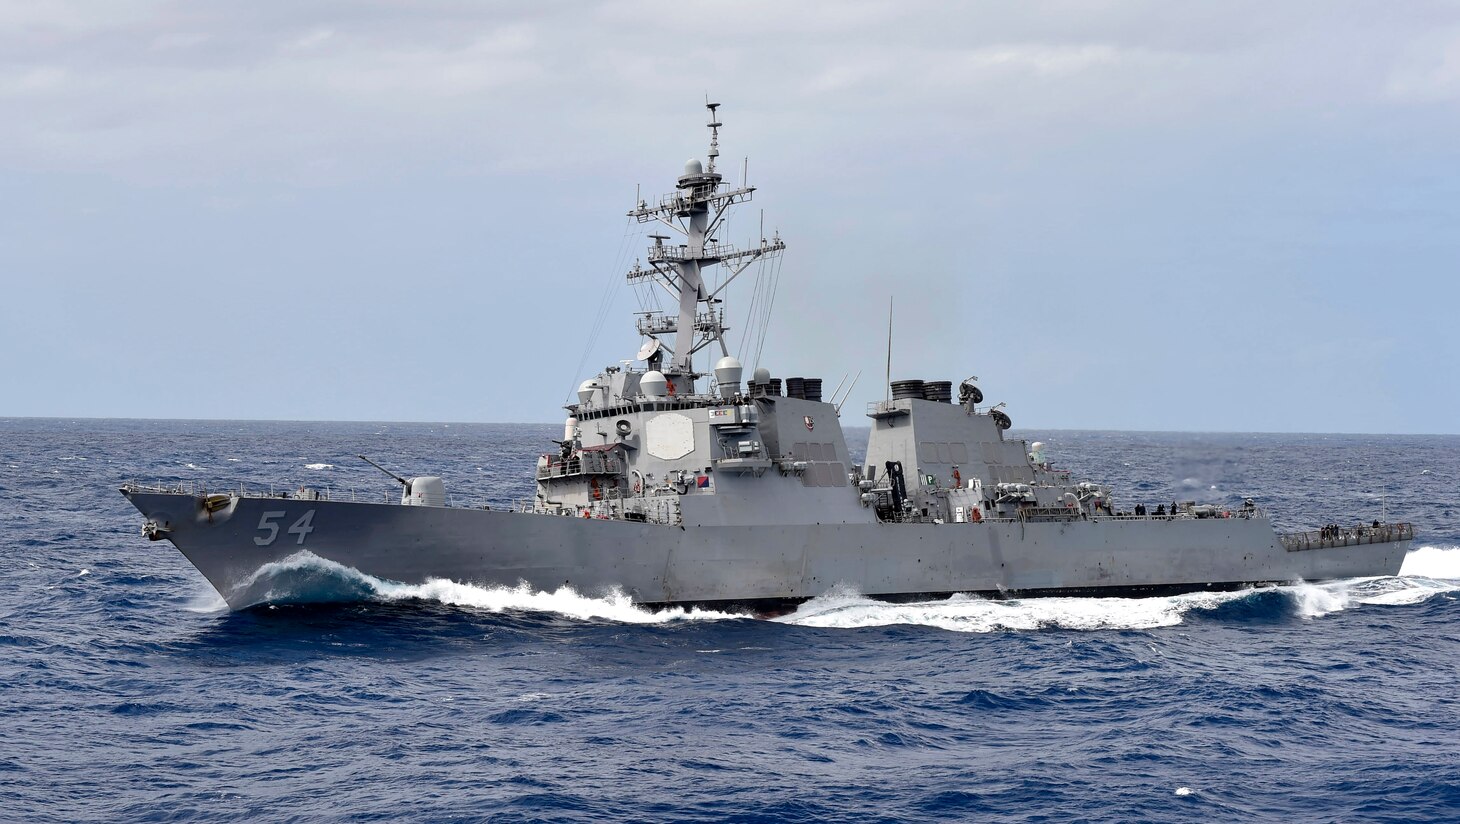 FILE PHOTO of The Arleigh Burke-class guided-missile destroyer USS Curtis Wilbur (DDG 54). Wilbur is forward-deployed to the U.S. 7th Fleet area of operations in support of security and stability in the Indo-Pacific region. (U.S. Navy photo by Mass Communication Specialist 1st Class Benjamin Dobbs/Released)